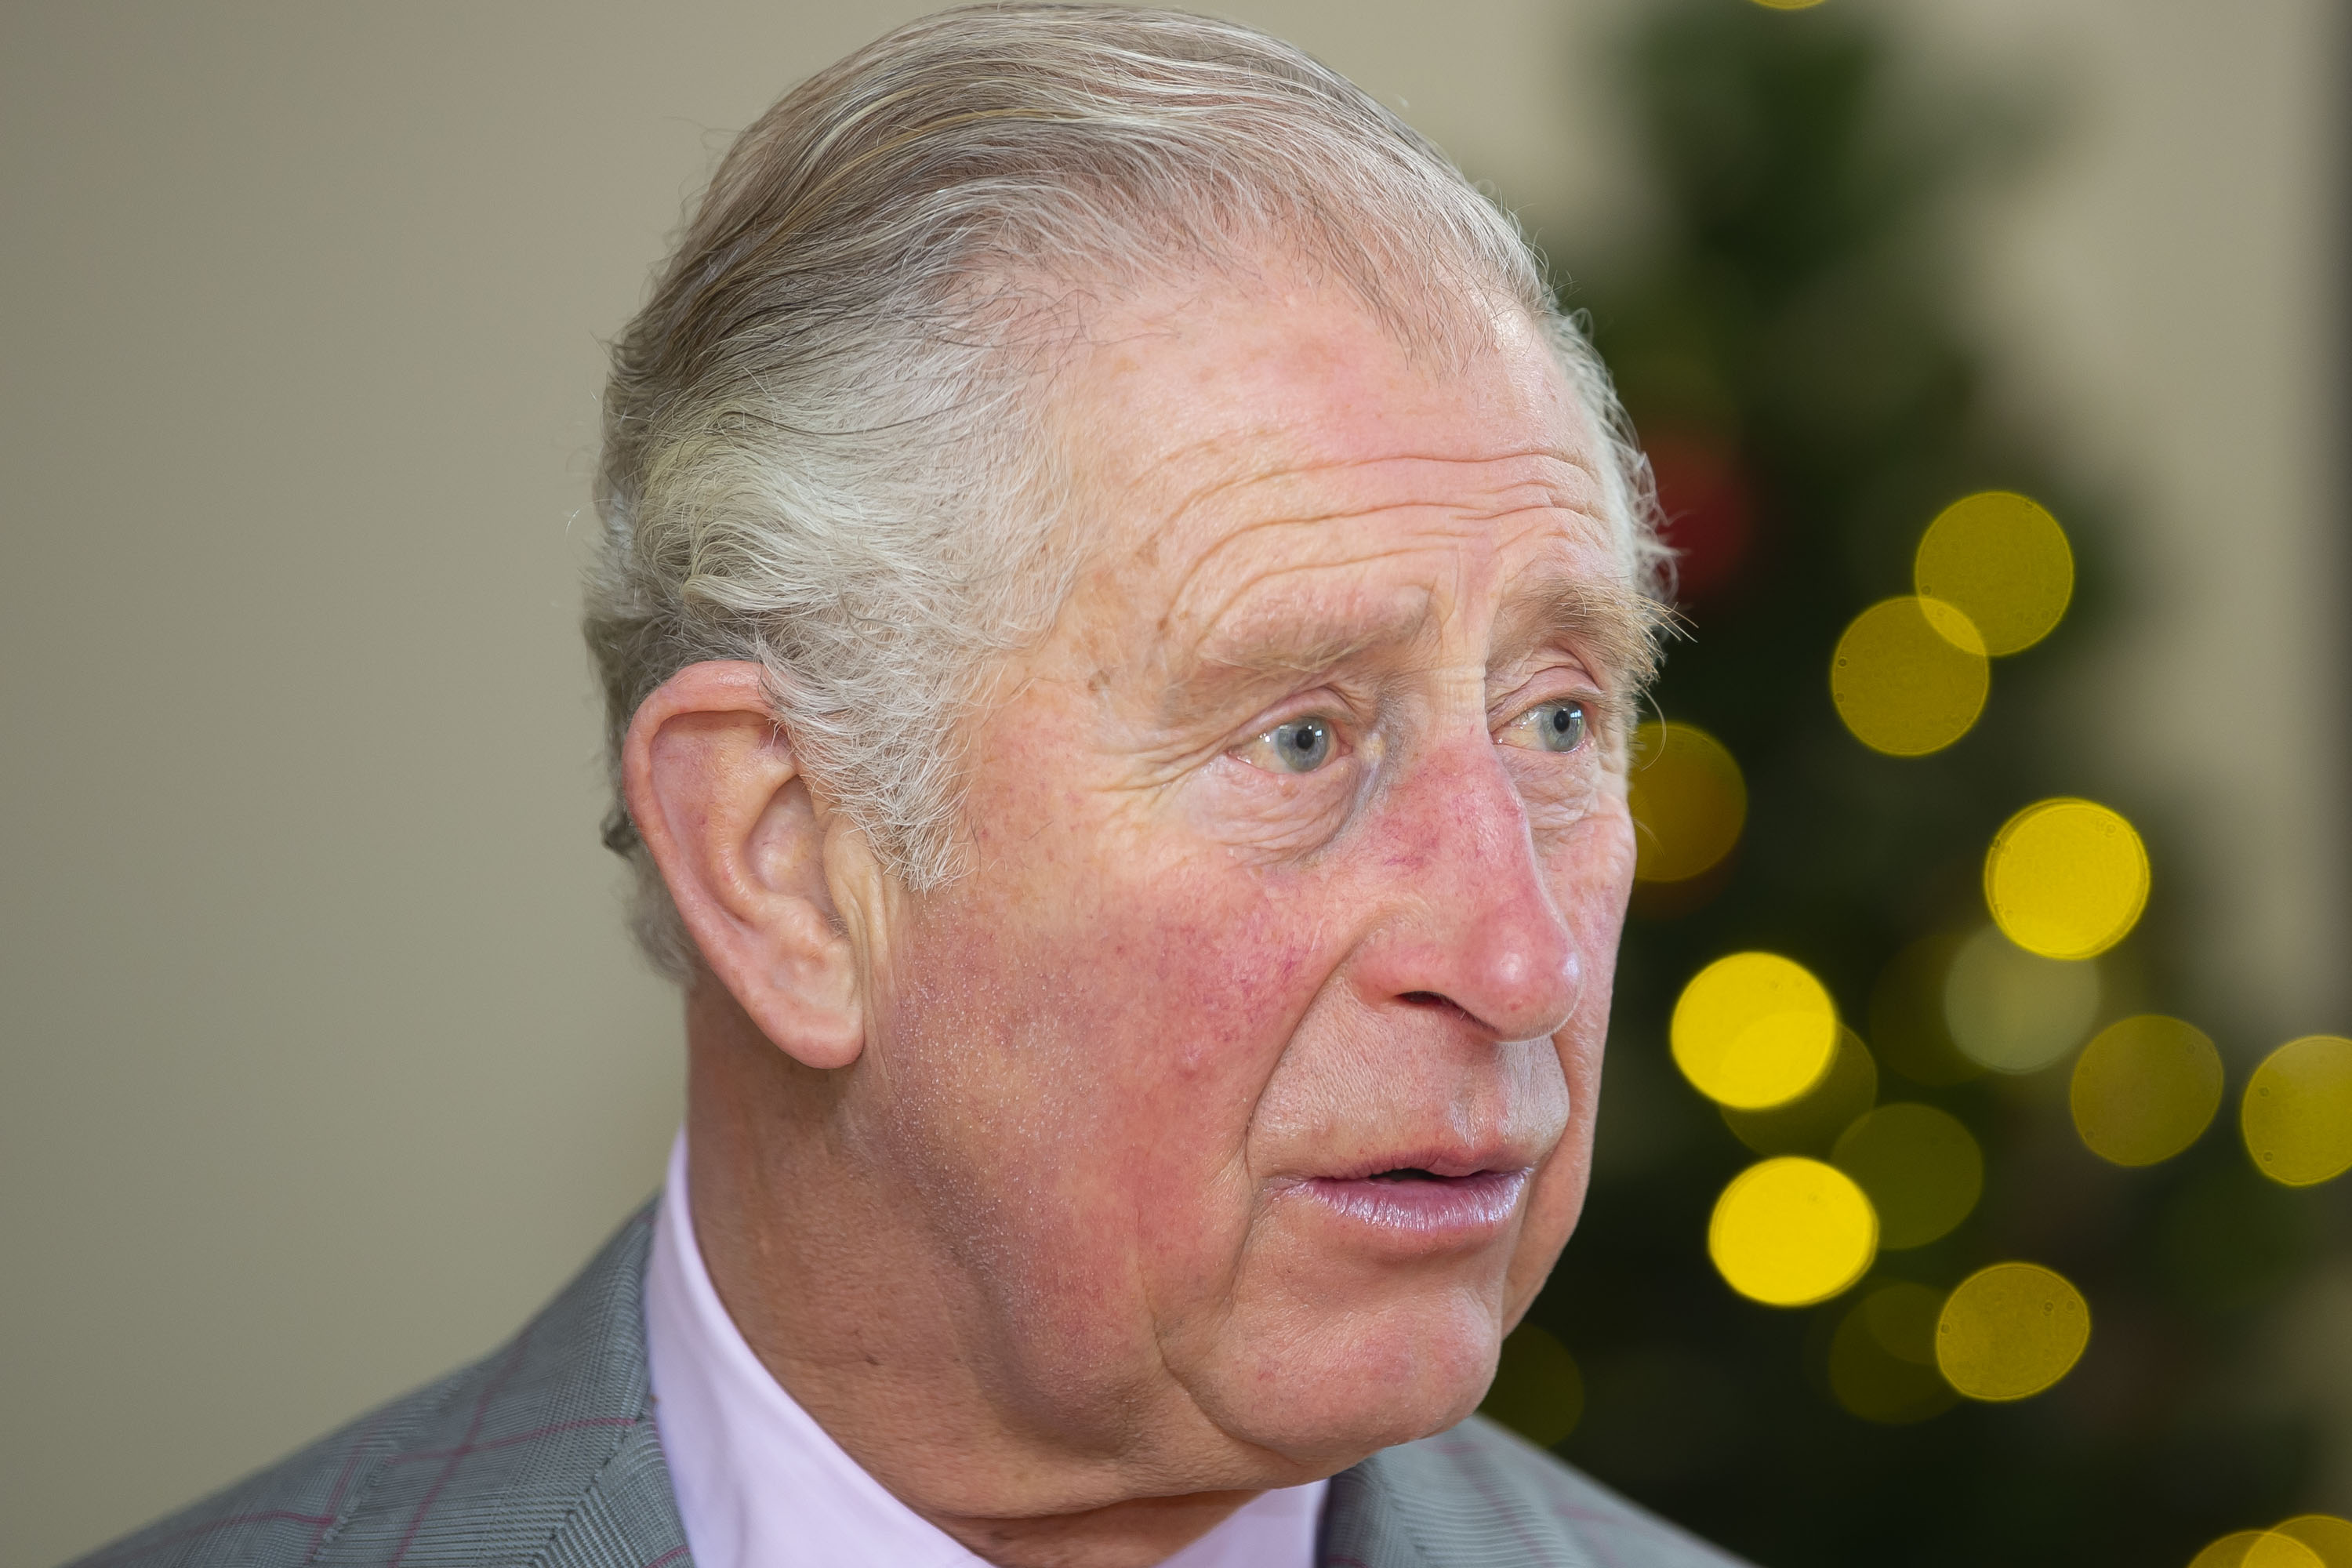 Prince Charles during an official visit to City Hospice Cardiff on December 7, 2018 in Cardiff, Wales | Source: Getty Images